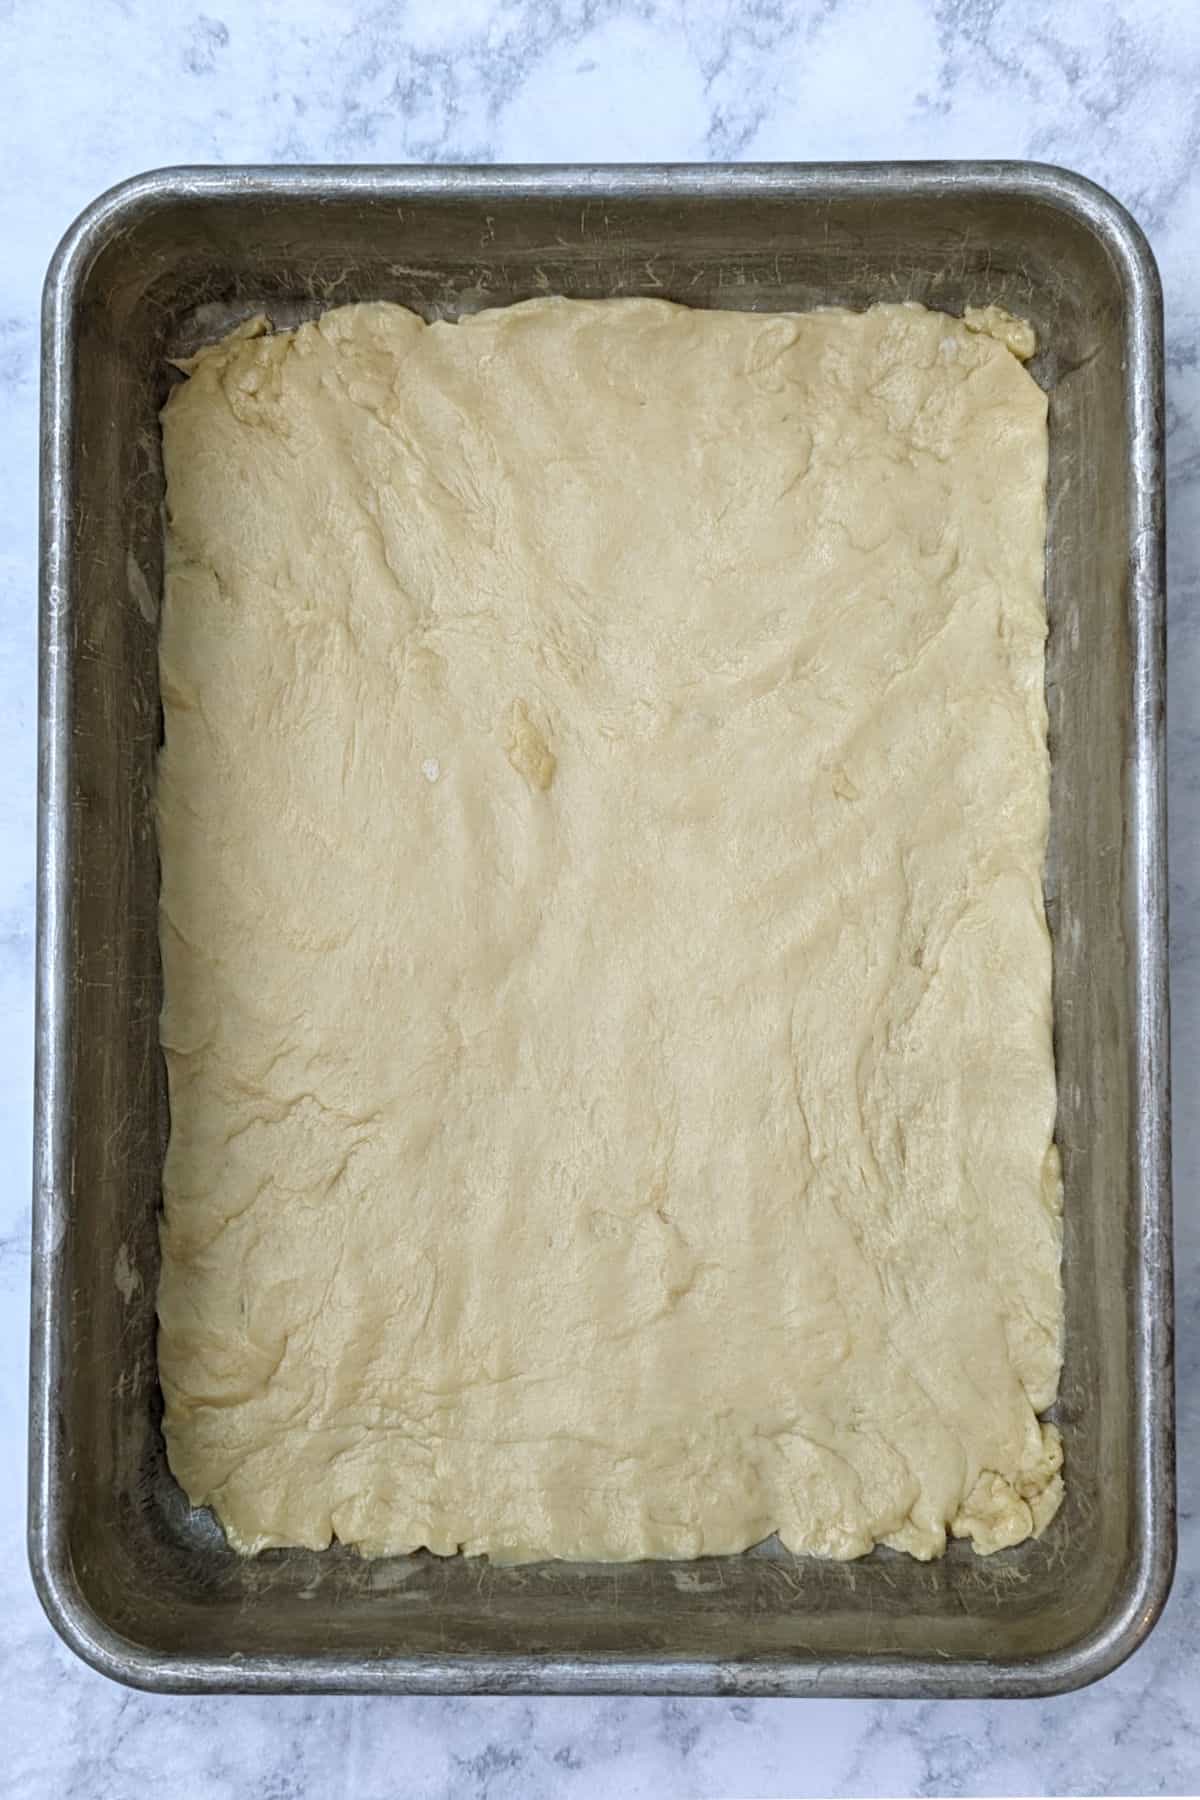 dough patted to edges of pan